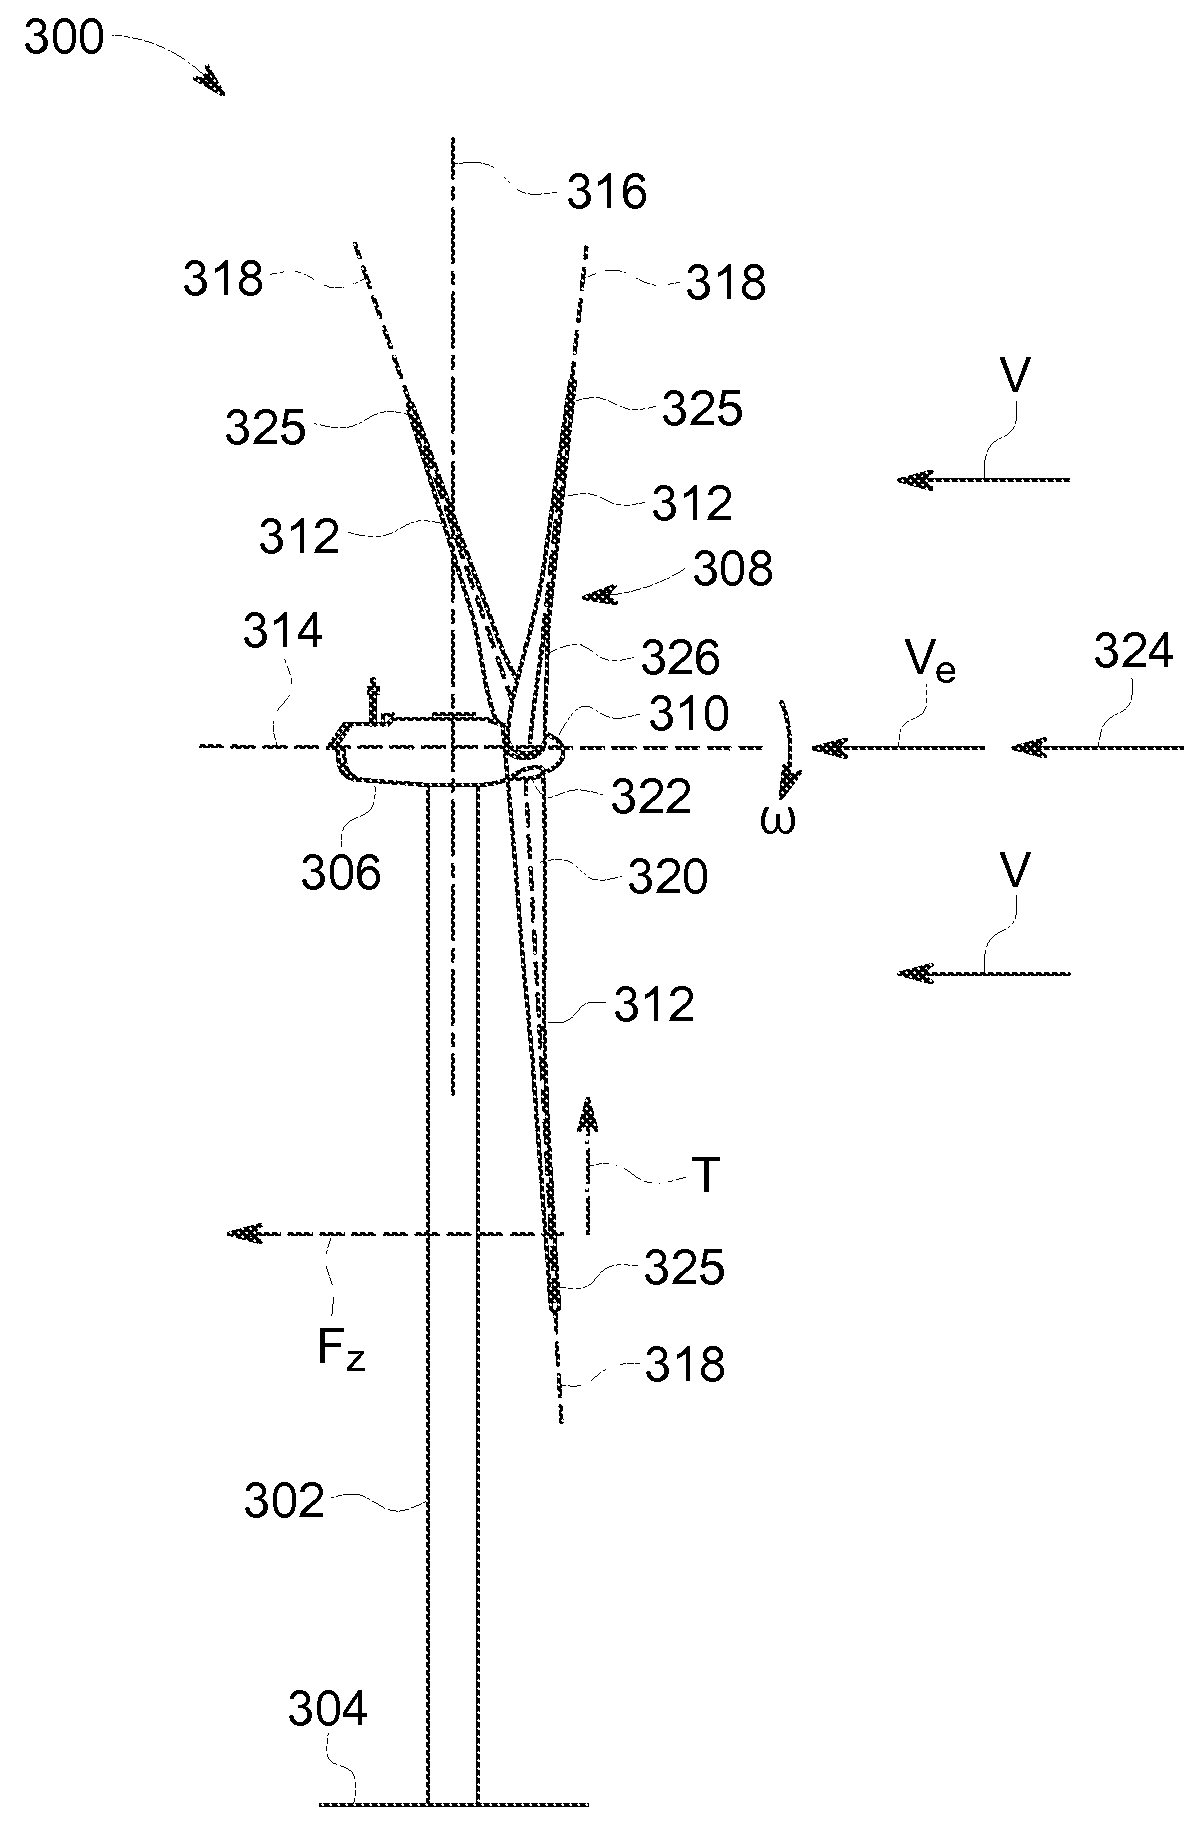 System and method for controlling a wind turbine